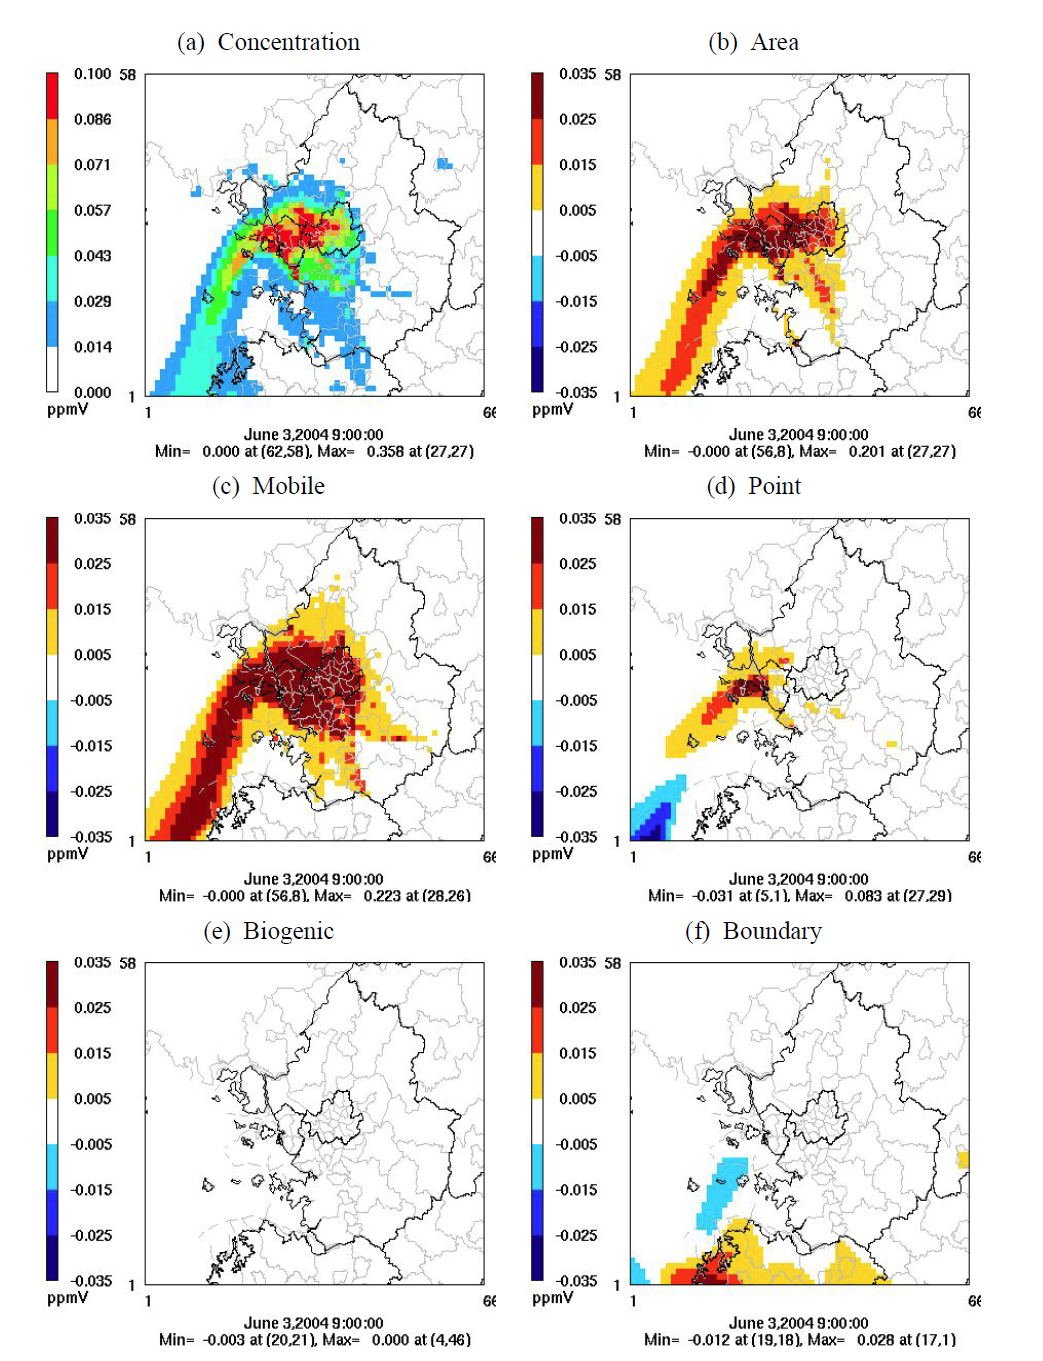 Spatial plots of (a) NOx concentration and contributions of (b) area, (c) mobile, (d) point, (e) biogenic sources, and (f) boundary conditions to NOx for June 3rd, 2004 at 9 KST